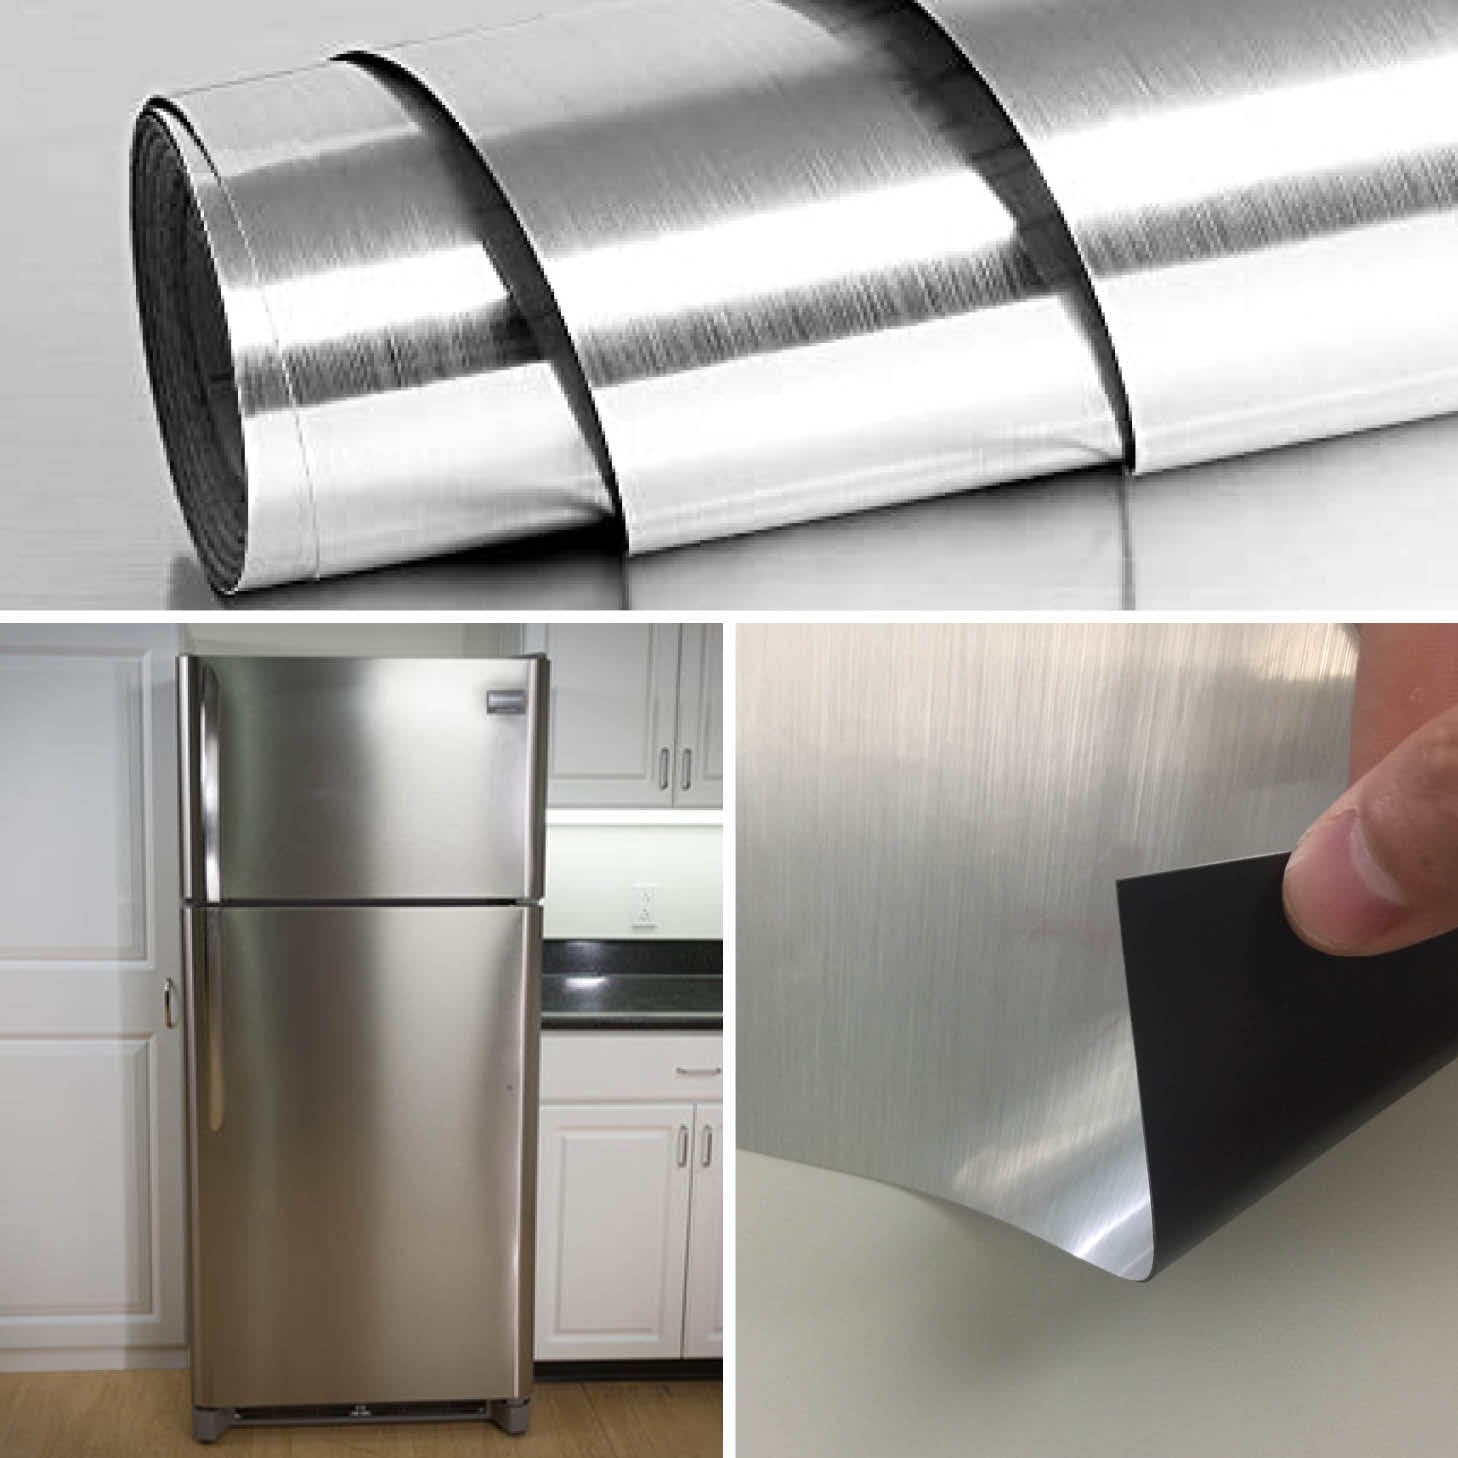 Do Magnets Stick to Stainless Steel Appliances?